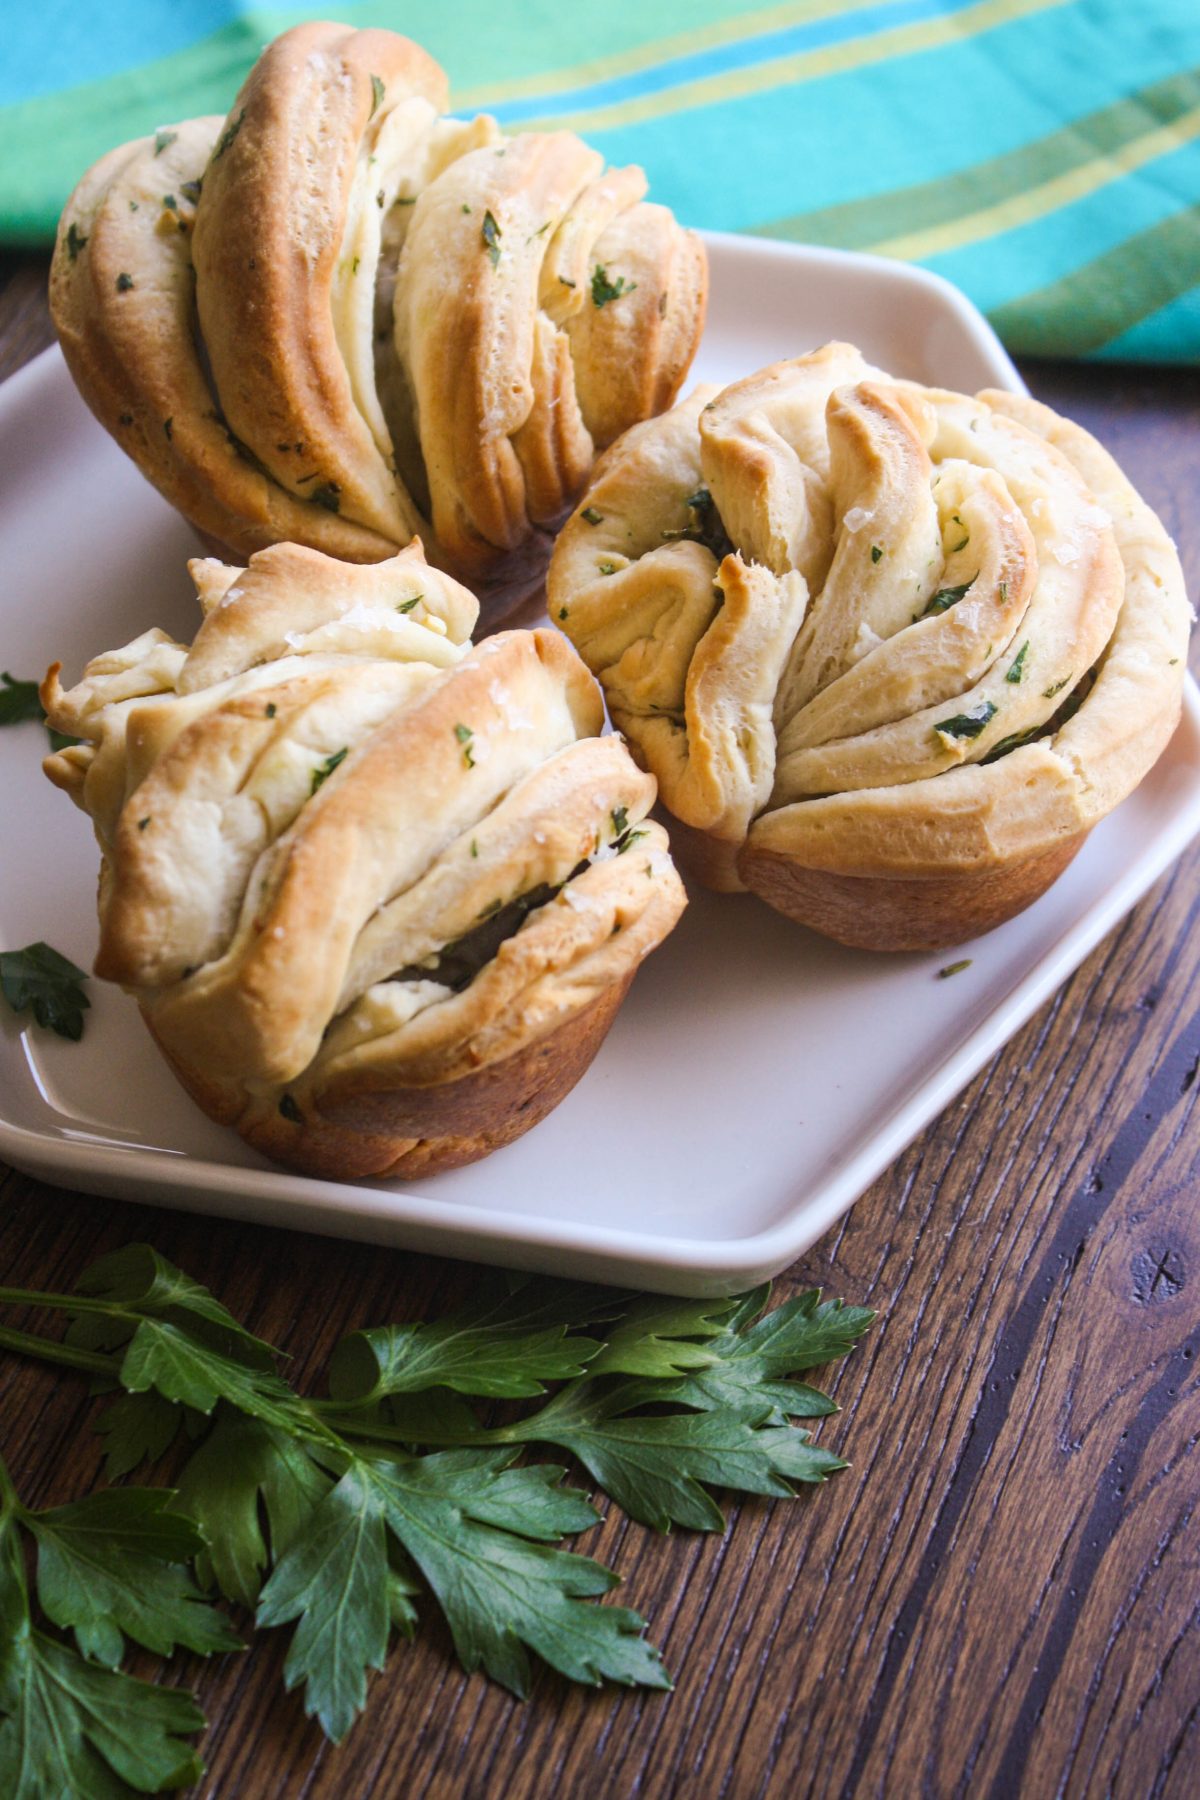 Garlic and Herb Loaded Pull-Apart Bread